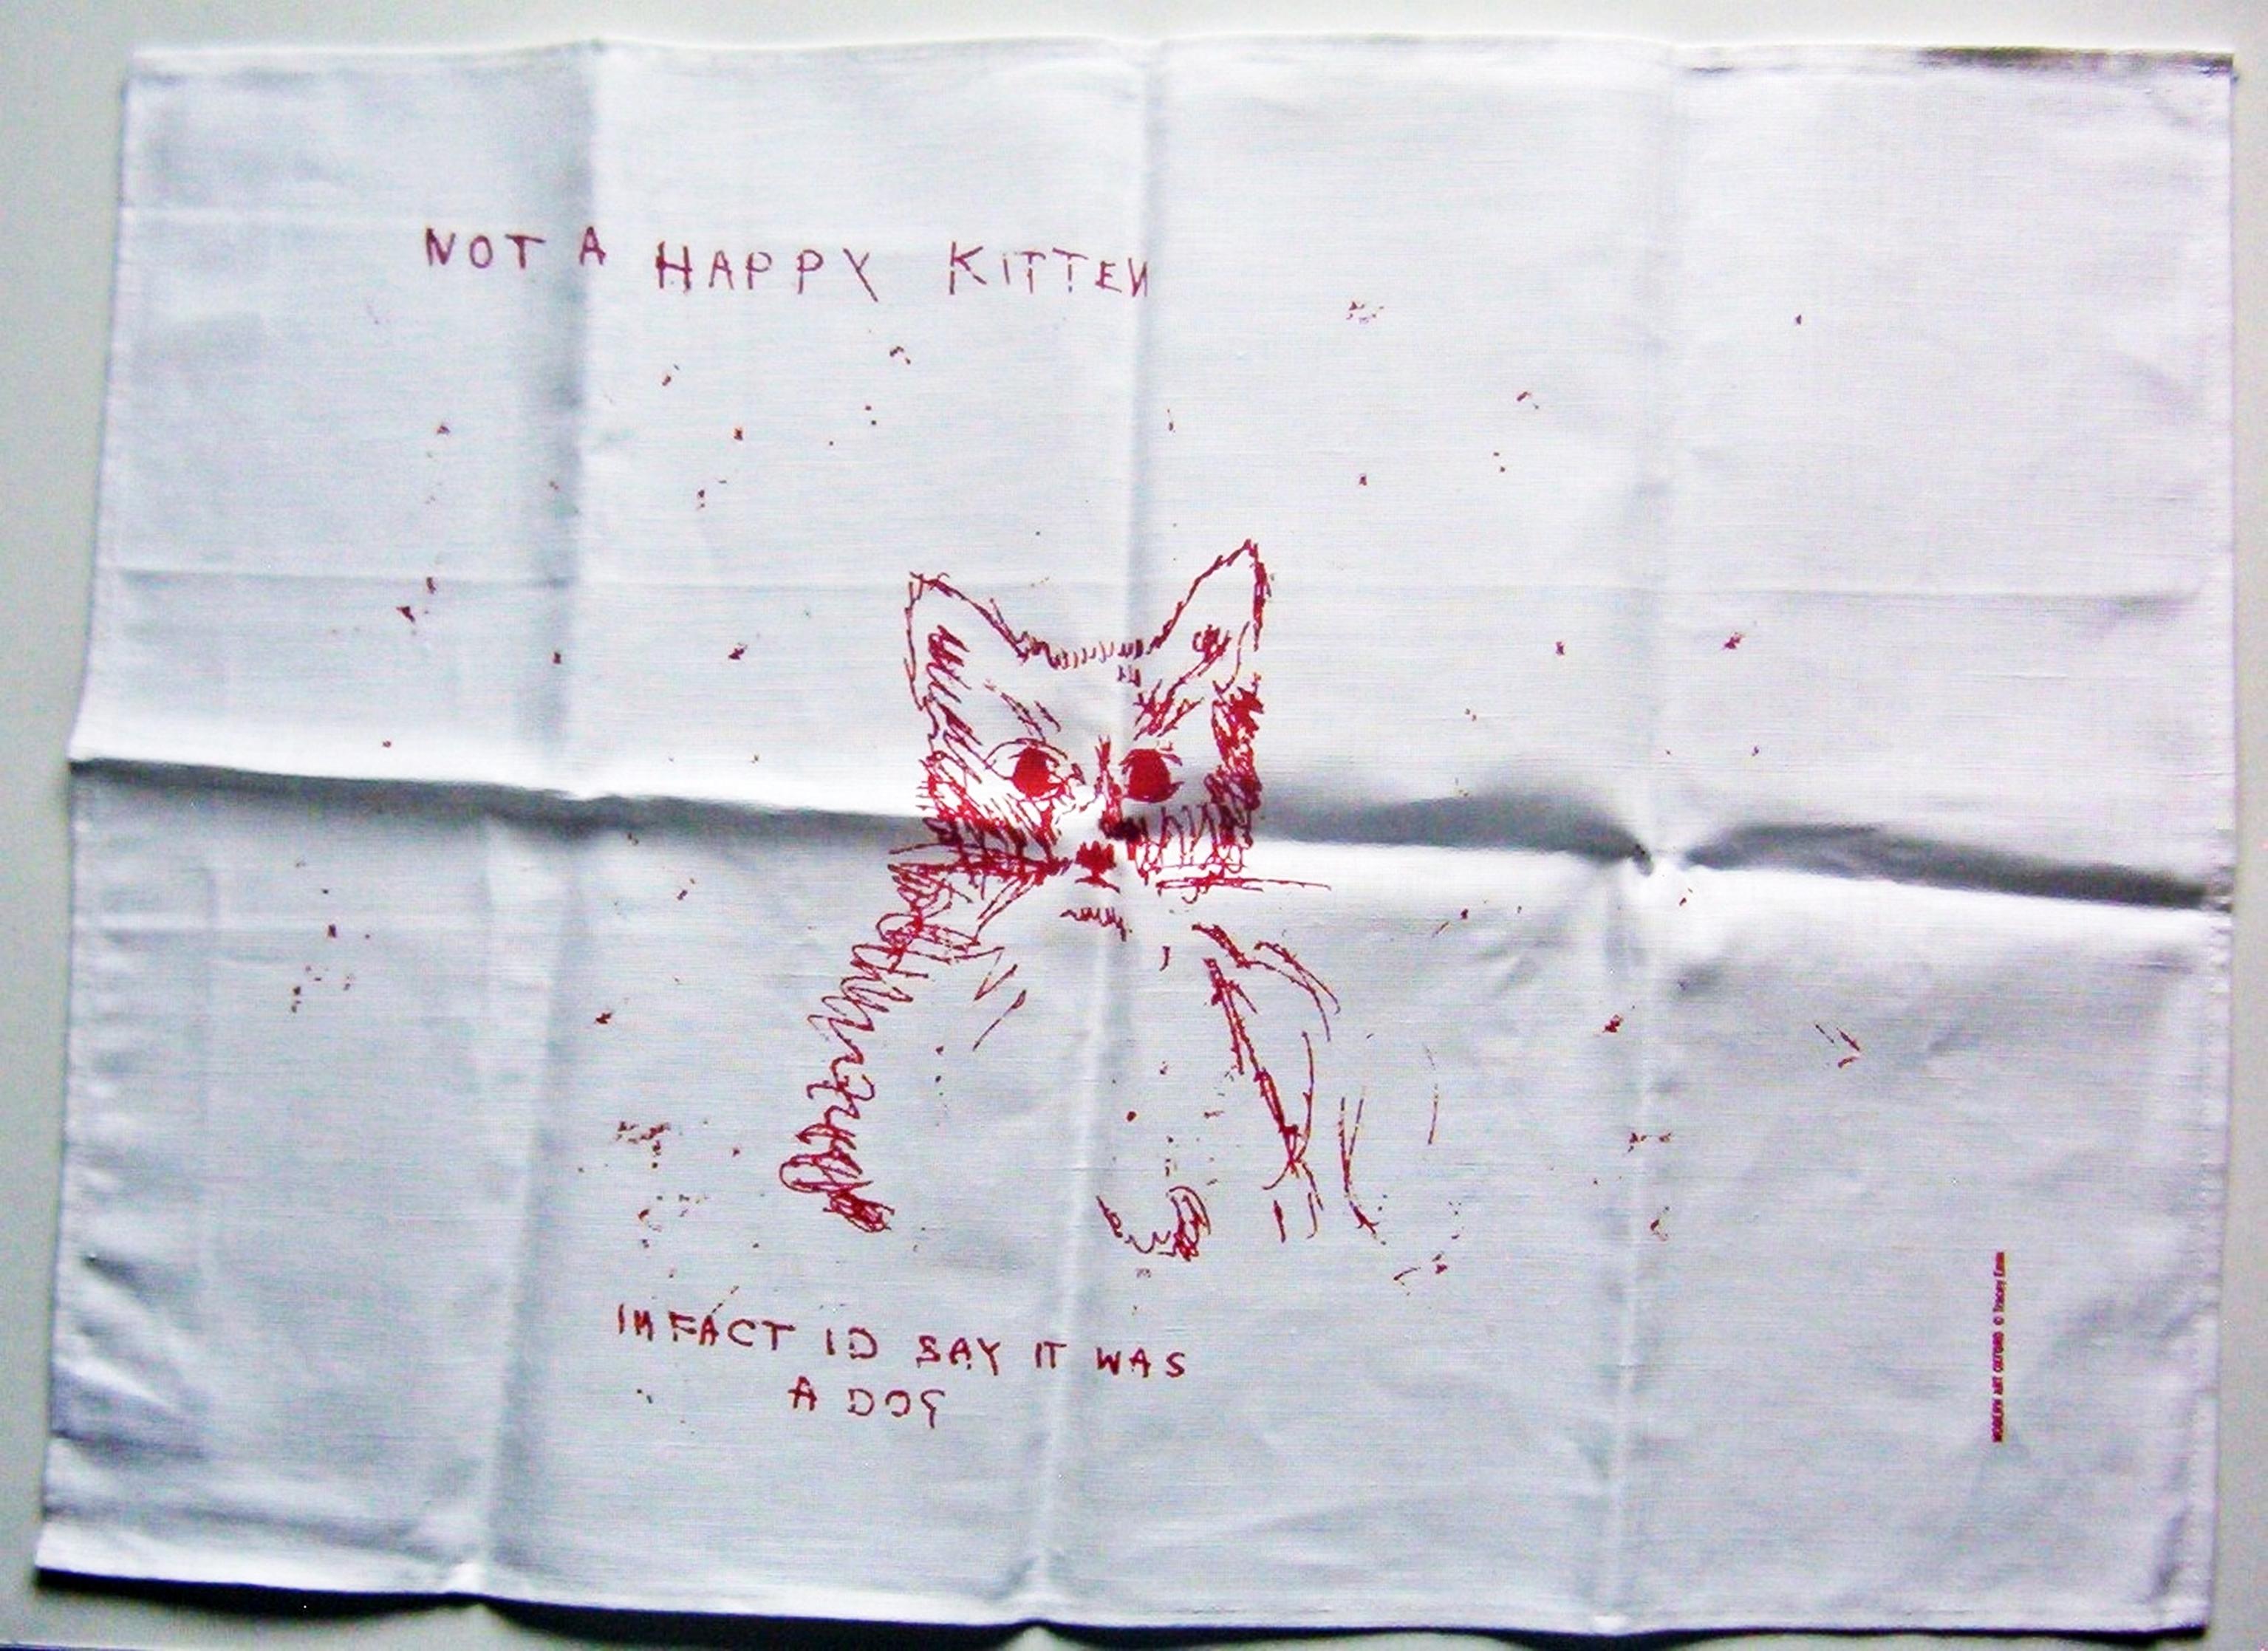 Tracey Emin
Not a Happy Kitten (Rare Vintage Limited Edition Silkscreen on Linen Tea Towel), 2003
Silkscreen on Linen Tea Towel
Bears Tracey Emin printed name and copyright logo in red, far right. (see photo)
19 7/10 × 27 inches
Unframed
This is a